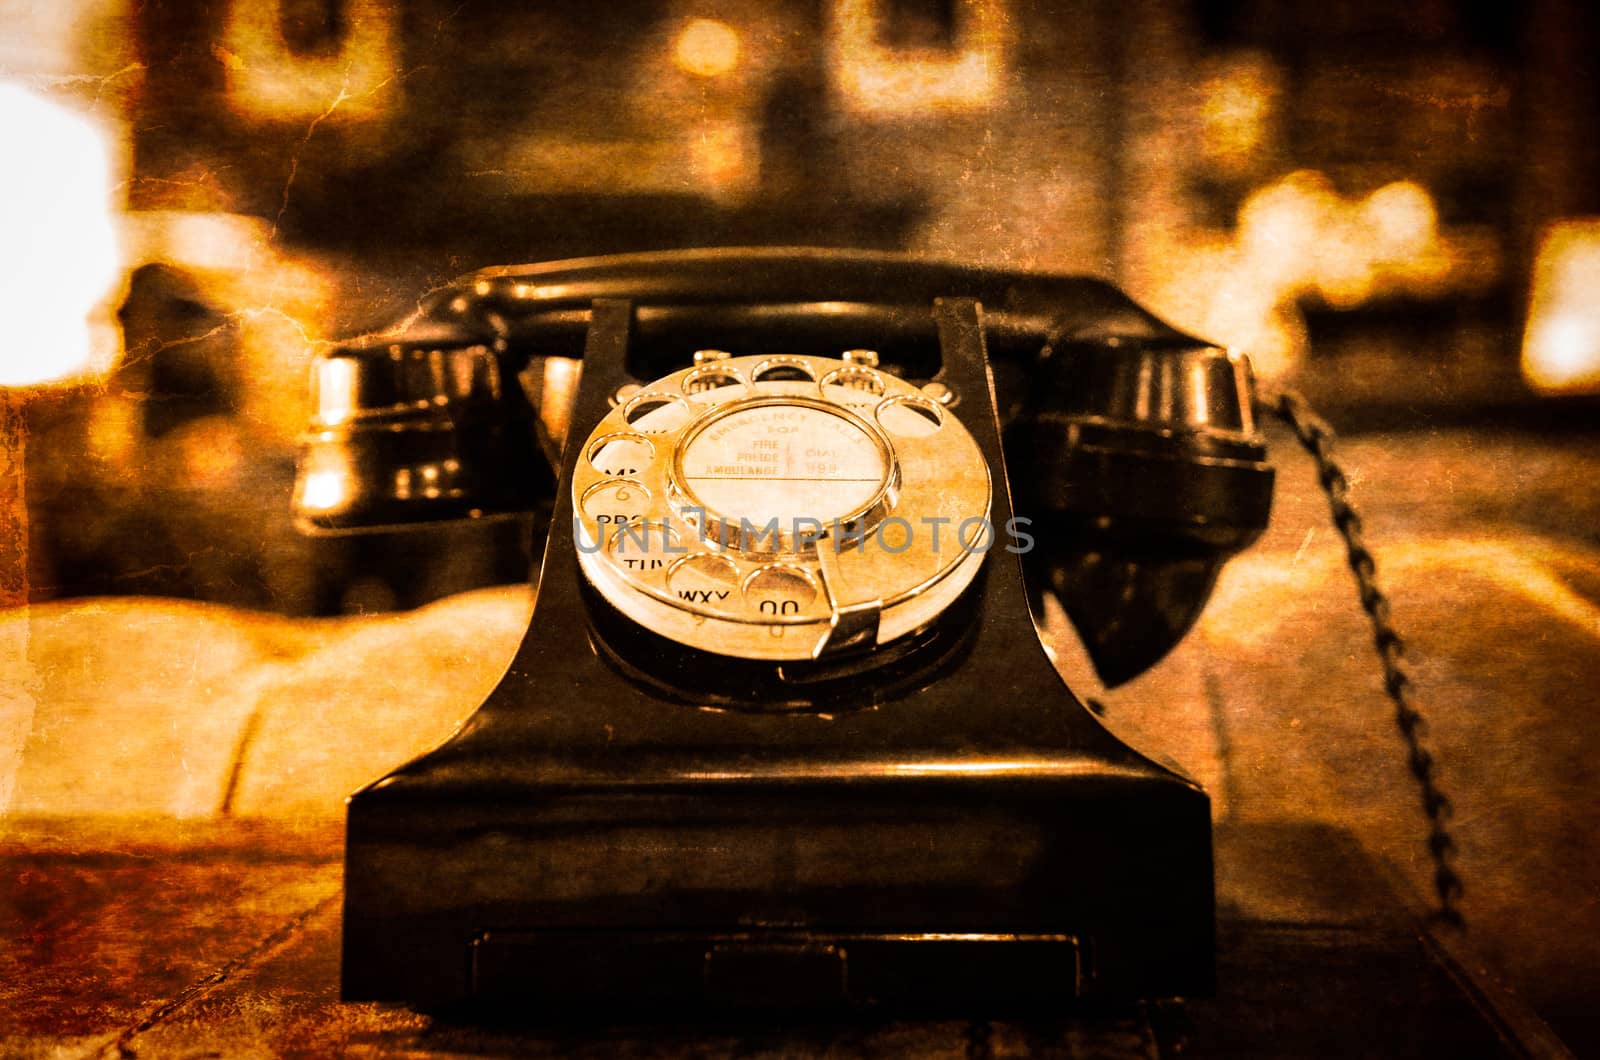 Detail view of old vintage dial telephone on the table, blurred background